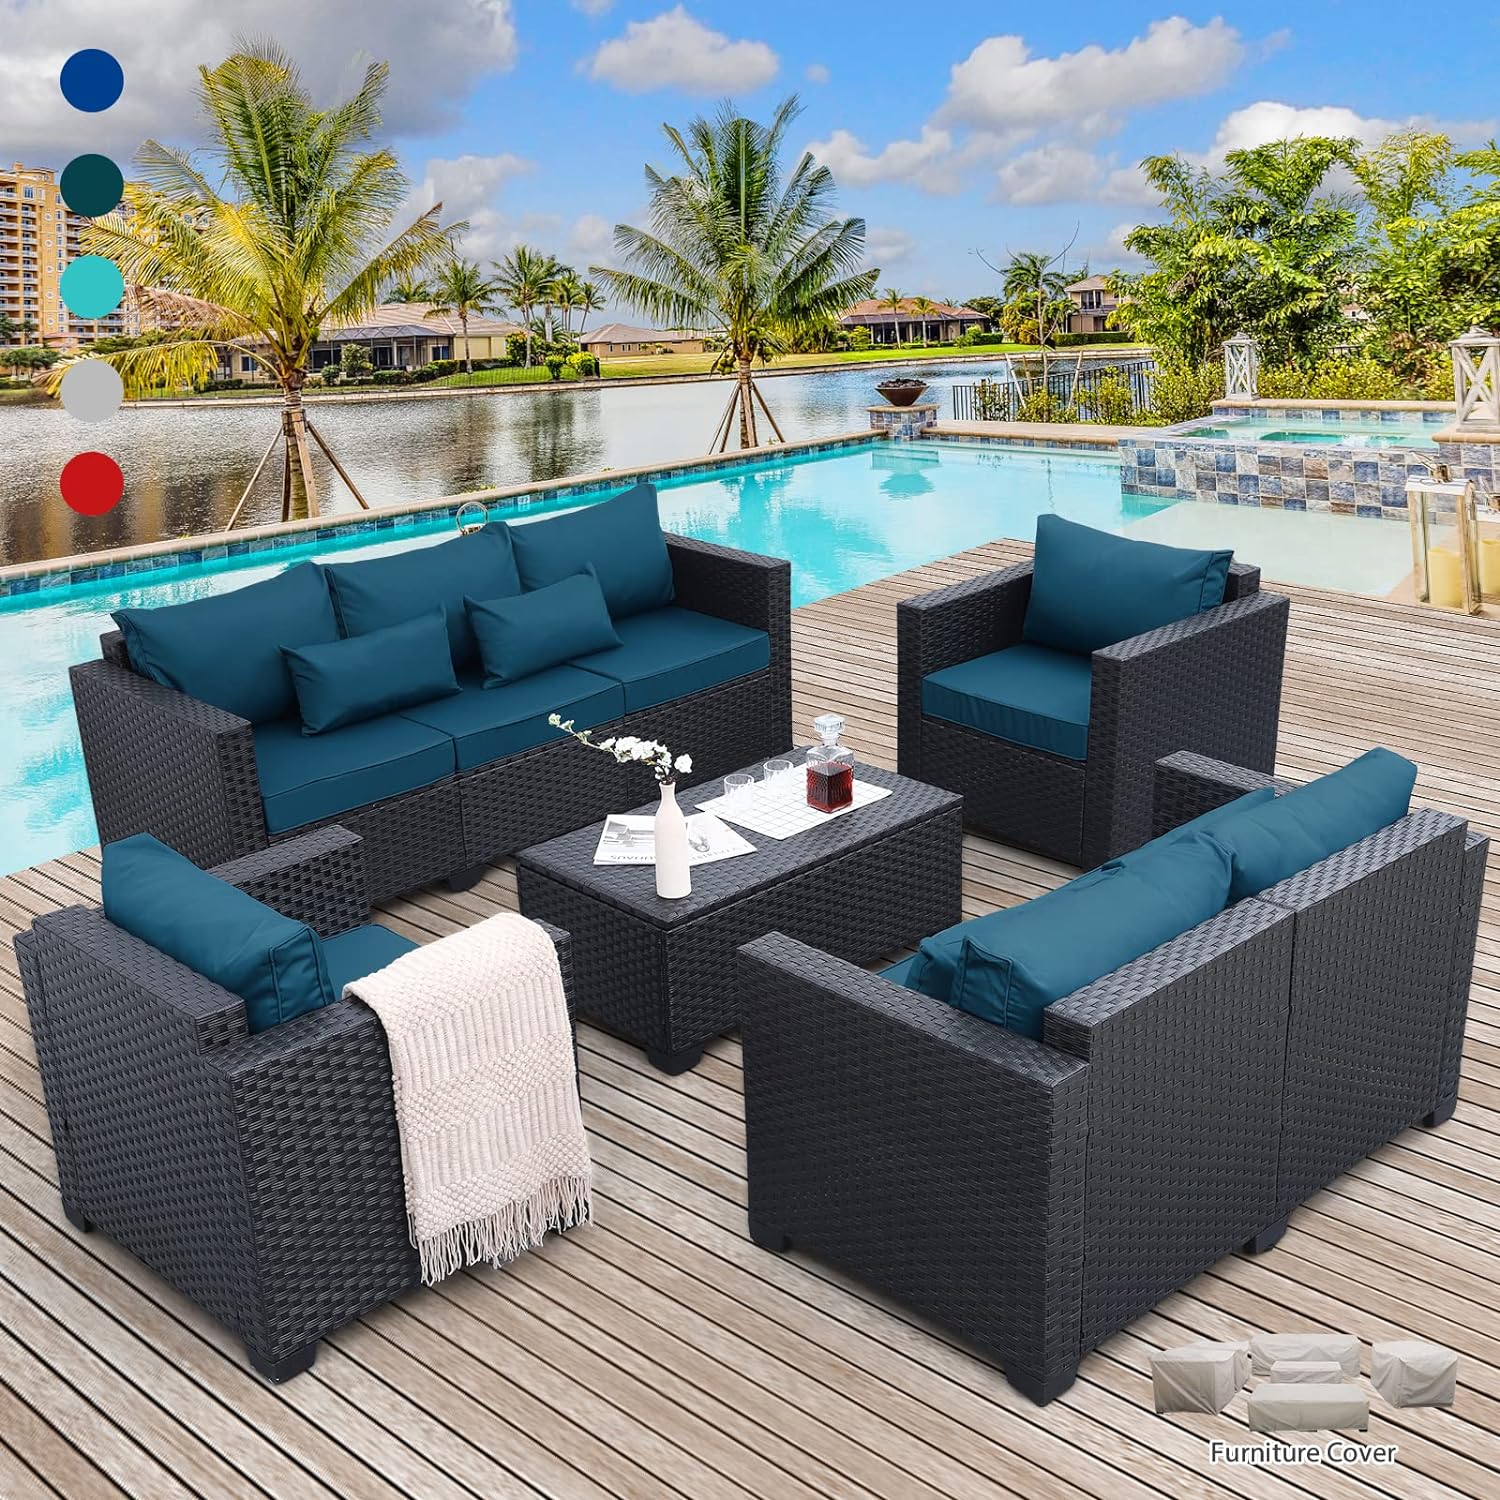 Rattaner Patio Furniture Set 5 Pieces Outdoor Furniture Sets Patio Couch Outdoor Chairs Coffee Table Peacock Blue Anti-Slip Cushions and Waterproof Covers